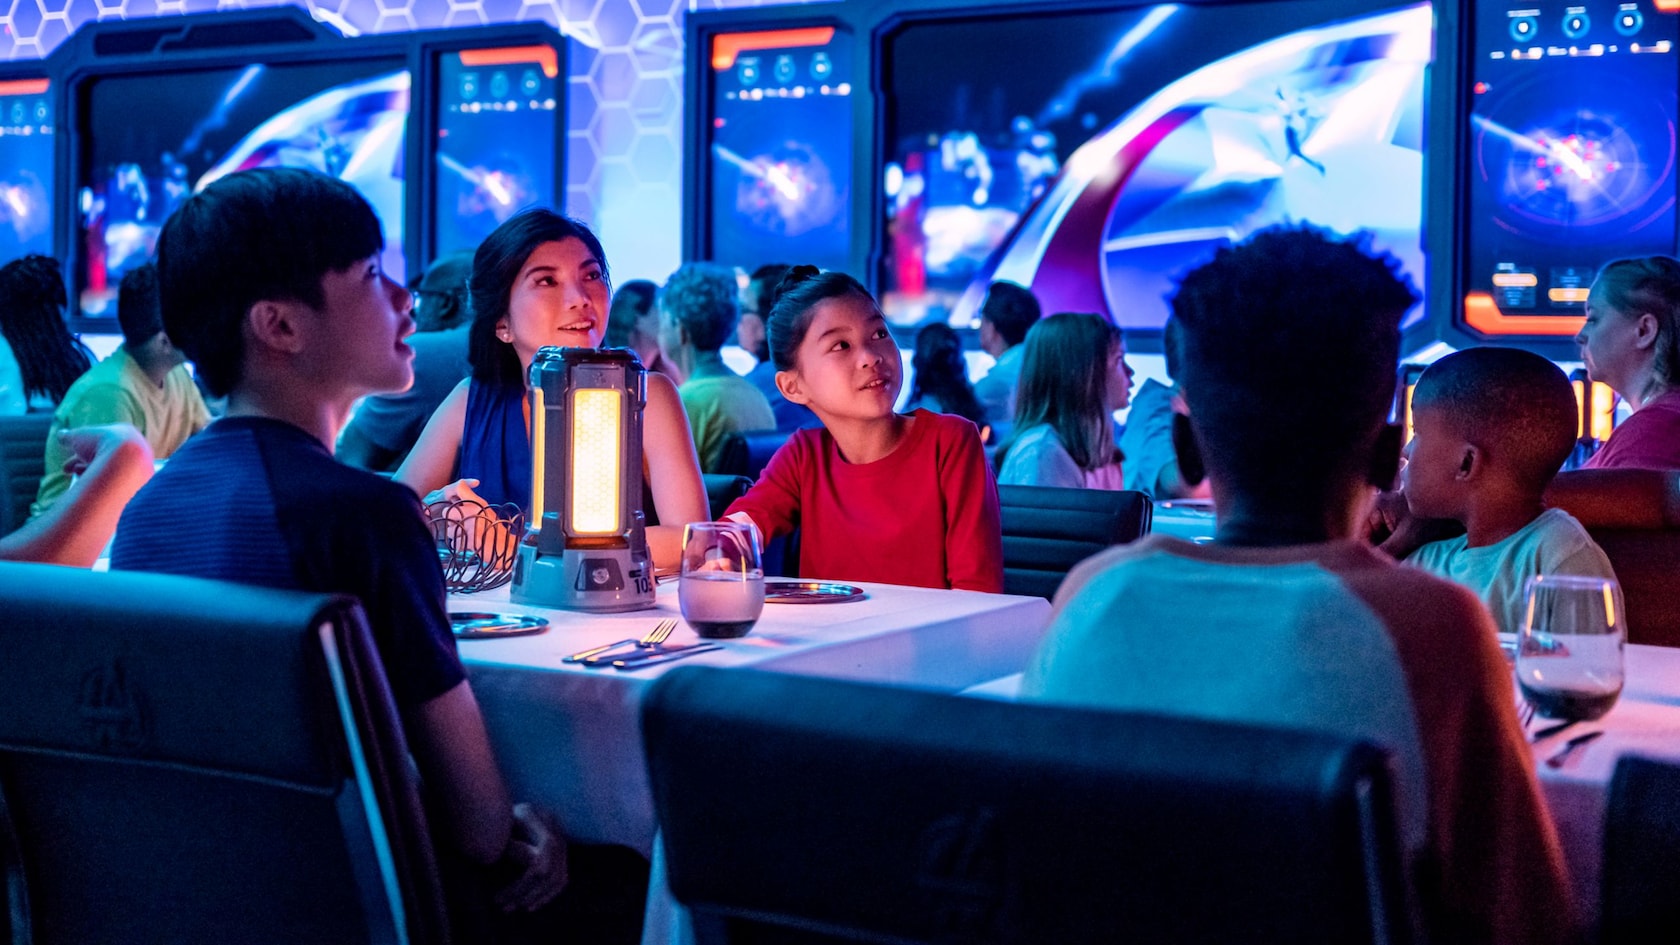 A group of children watching something fascinating while in a Marvel themed restaurant